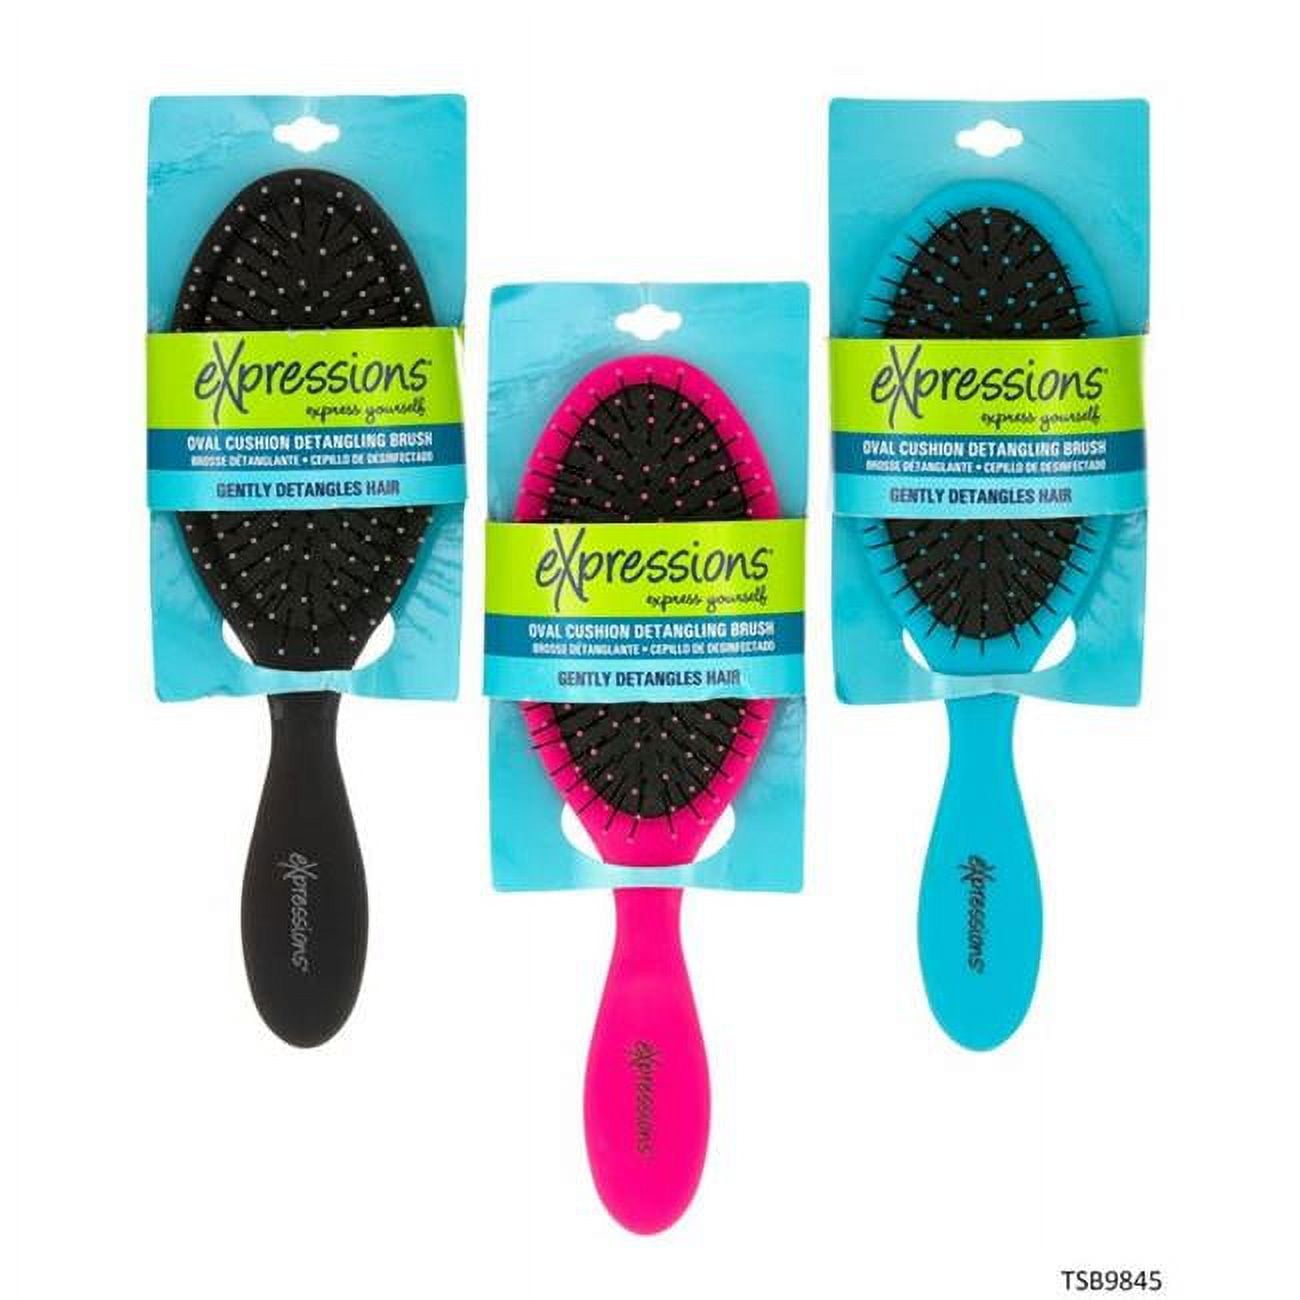 Picture of DDI 2339695 Expressions Oval Cushion Detangling Brush - Assorted Colors Case of 48